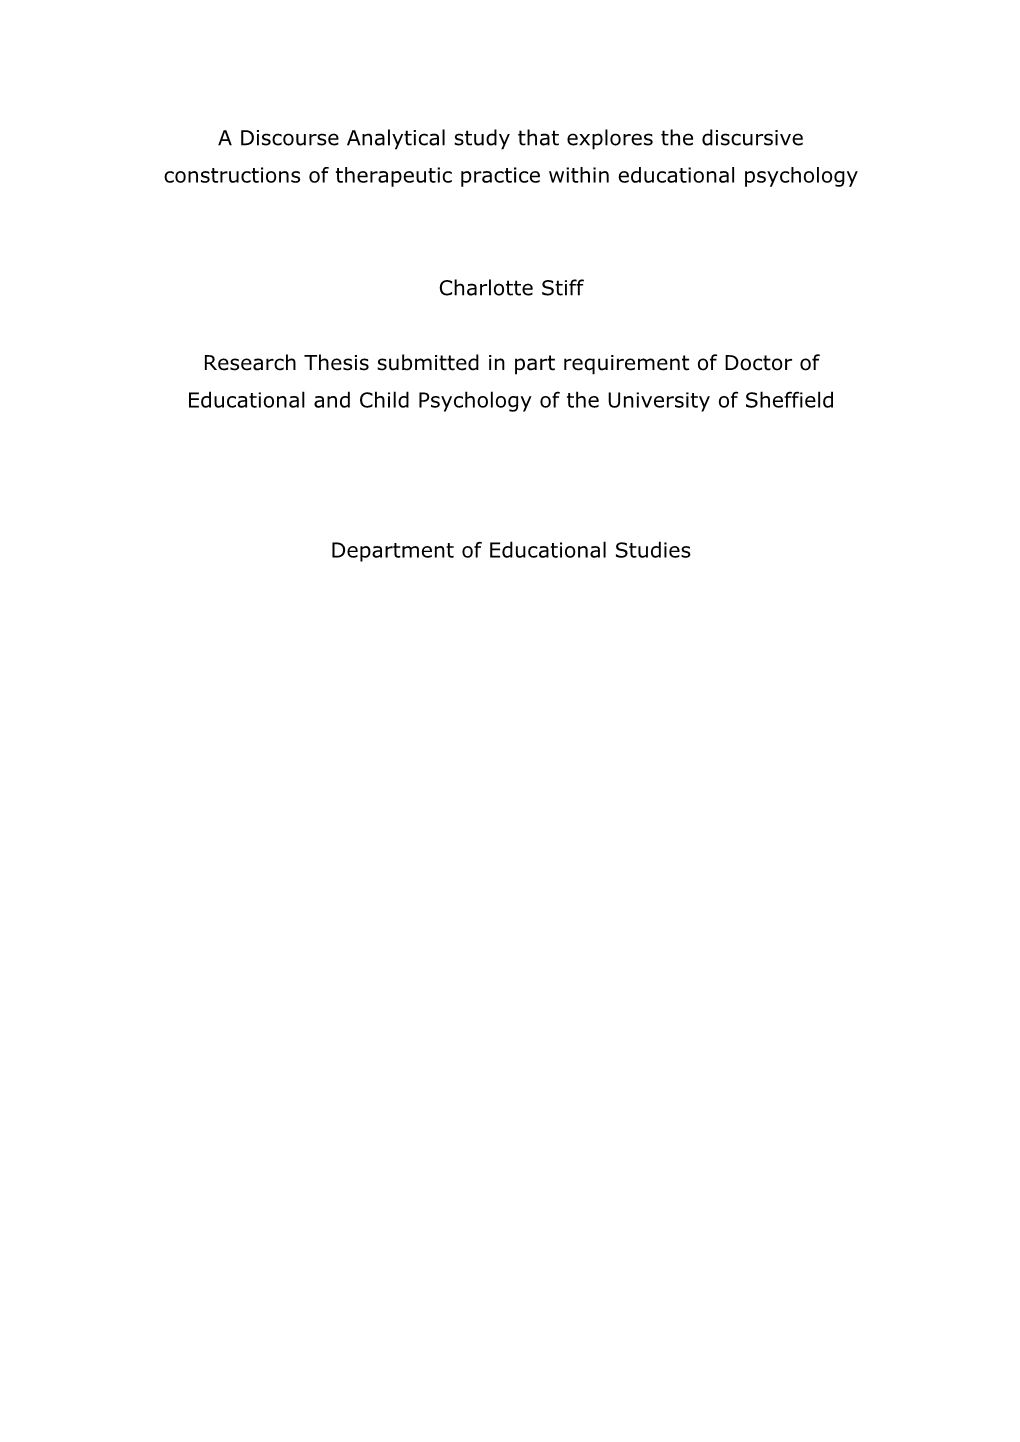 A Discourse Analytical Study That Explores the Discursive Constructions of Therapeutic Practice Within Educational Psychology